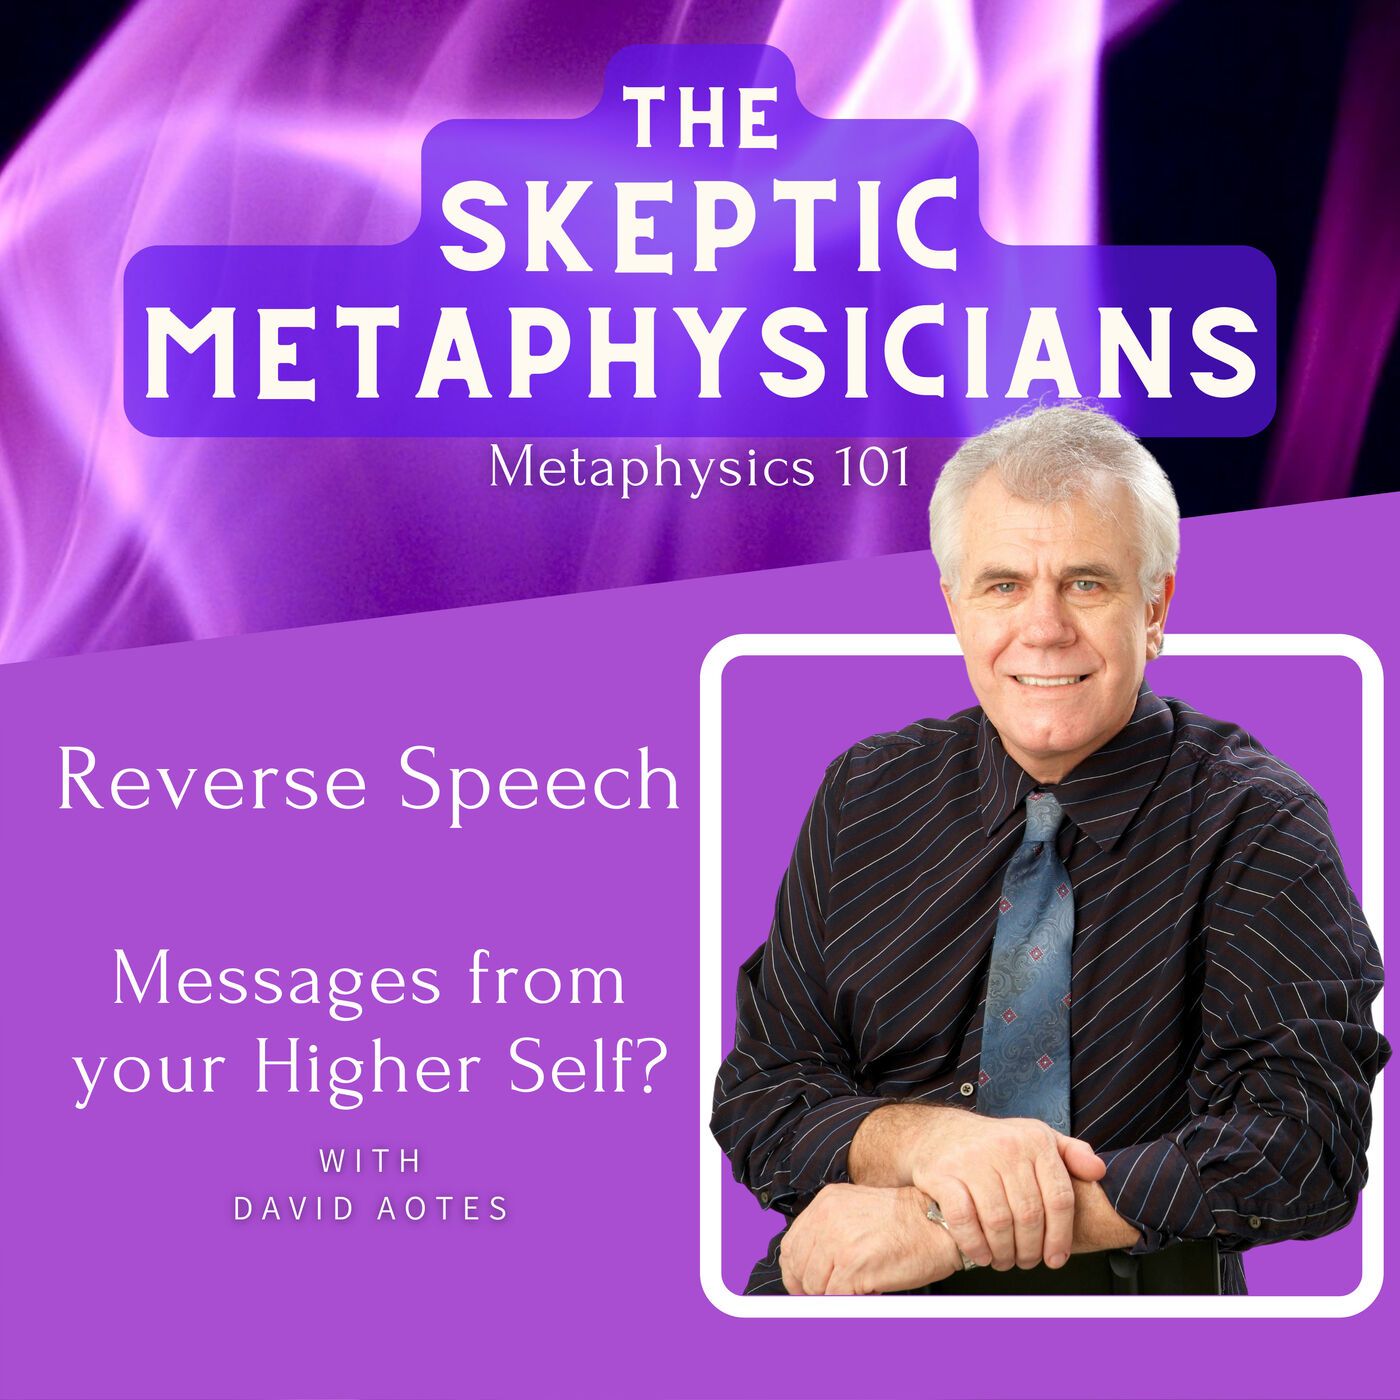 Reverse Speech - Messages from your Higher Self | David Oates Image